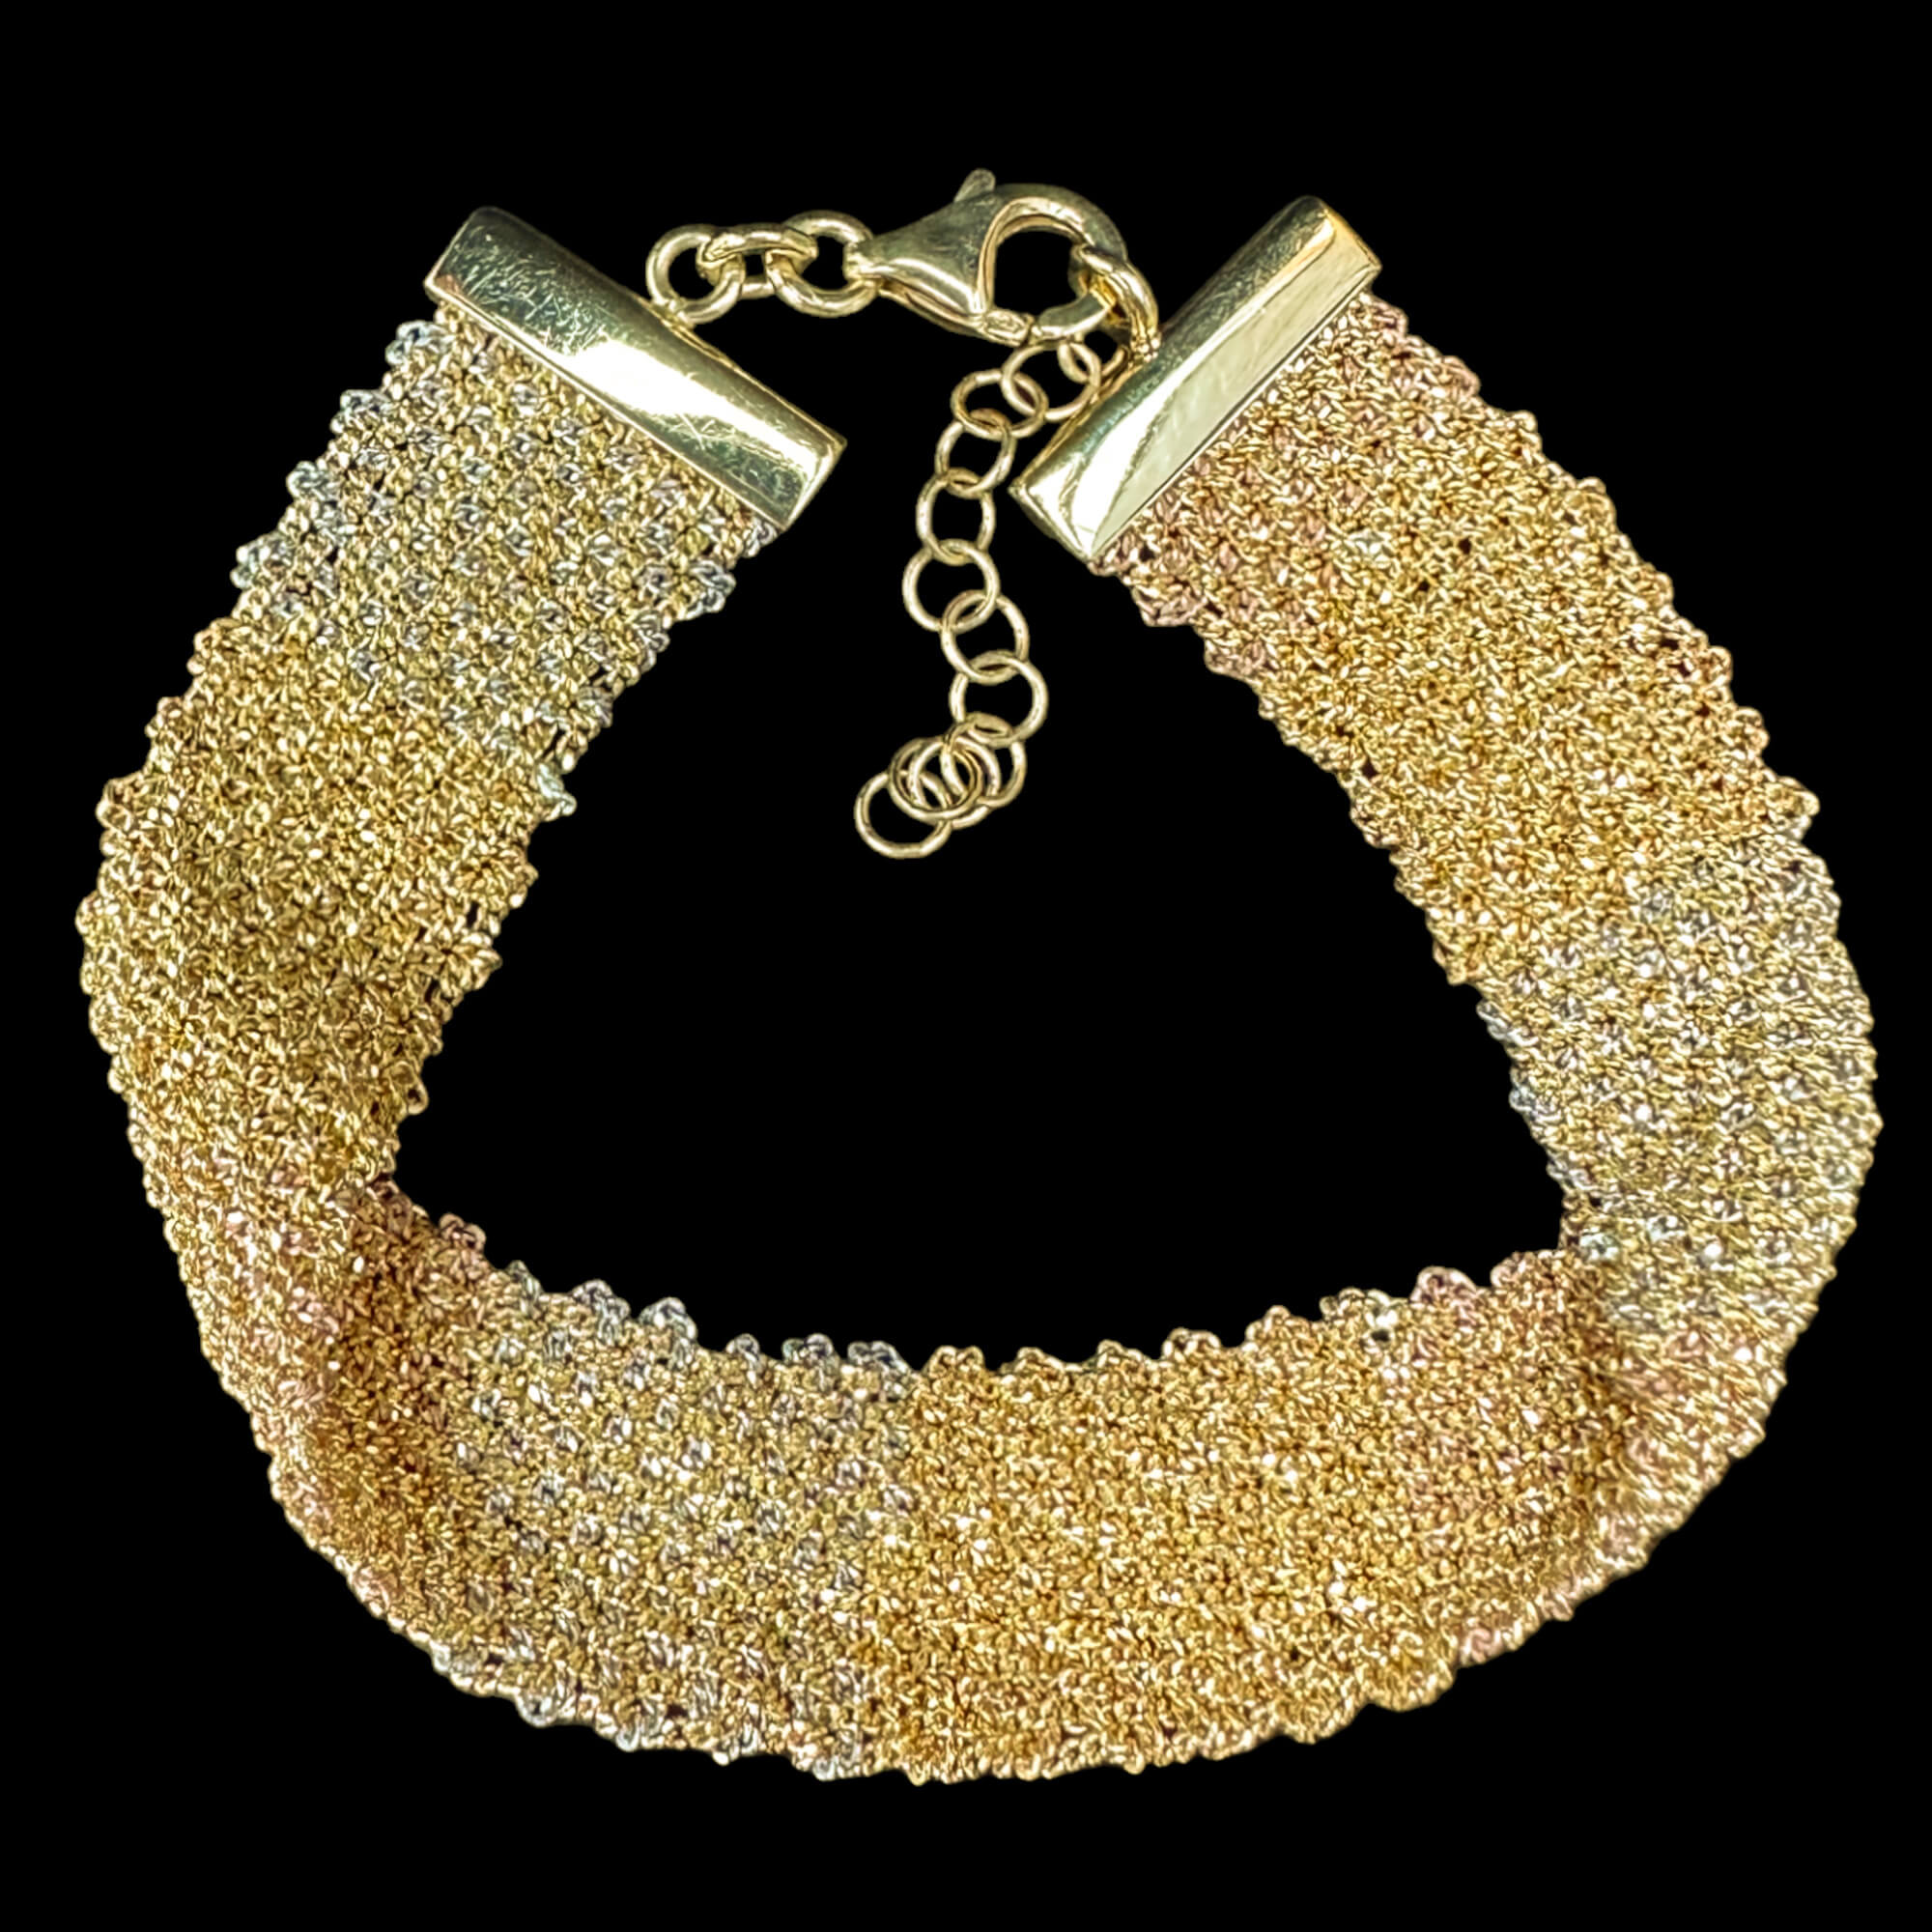 Three-colored gold-plated bracelet of interwoven chains